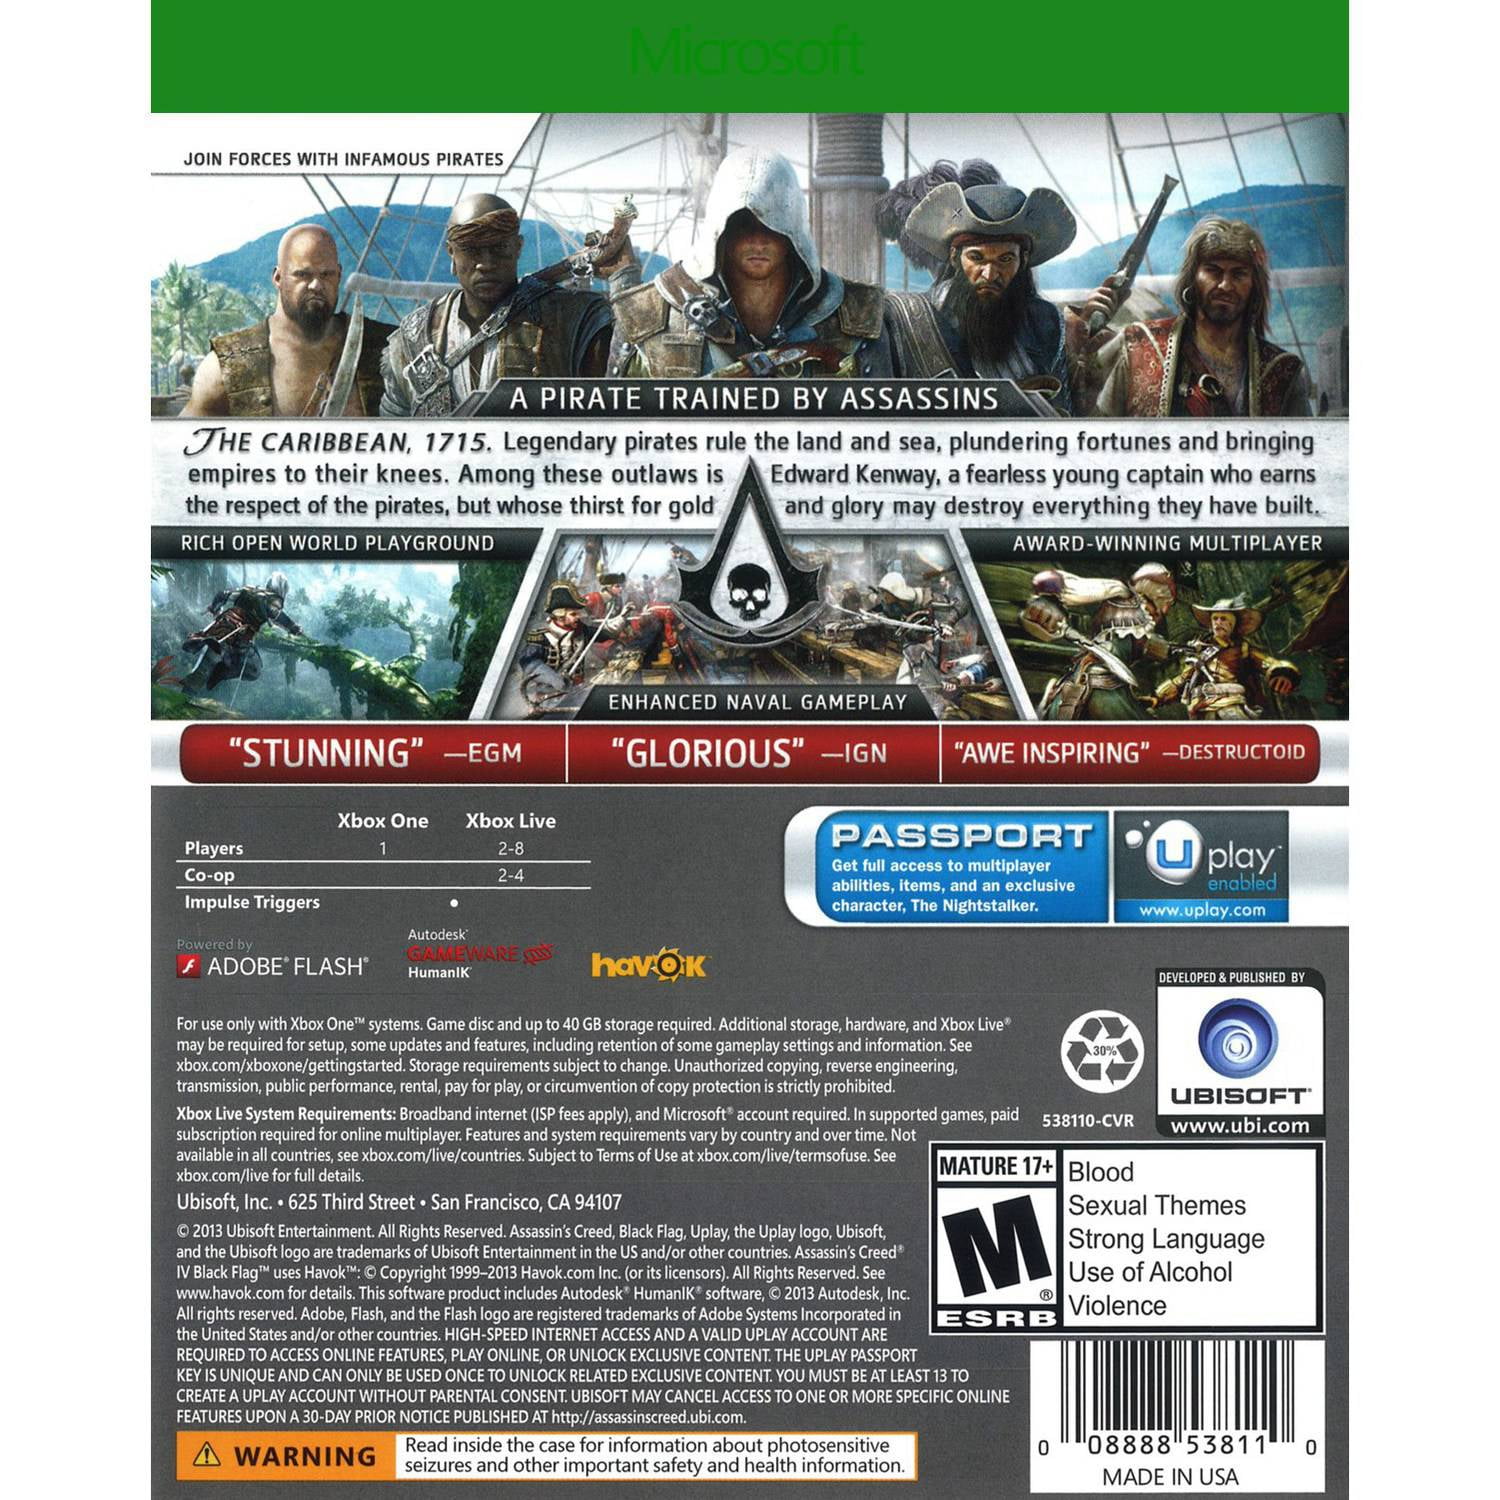 SideQuesting's Game of the Year 2013: Assassin's Creed IV: Black Flag –  SideQuesting